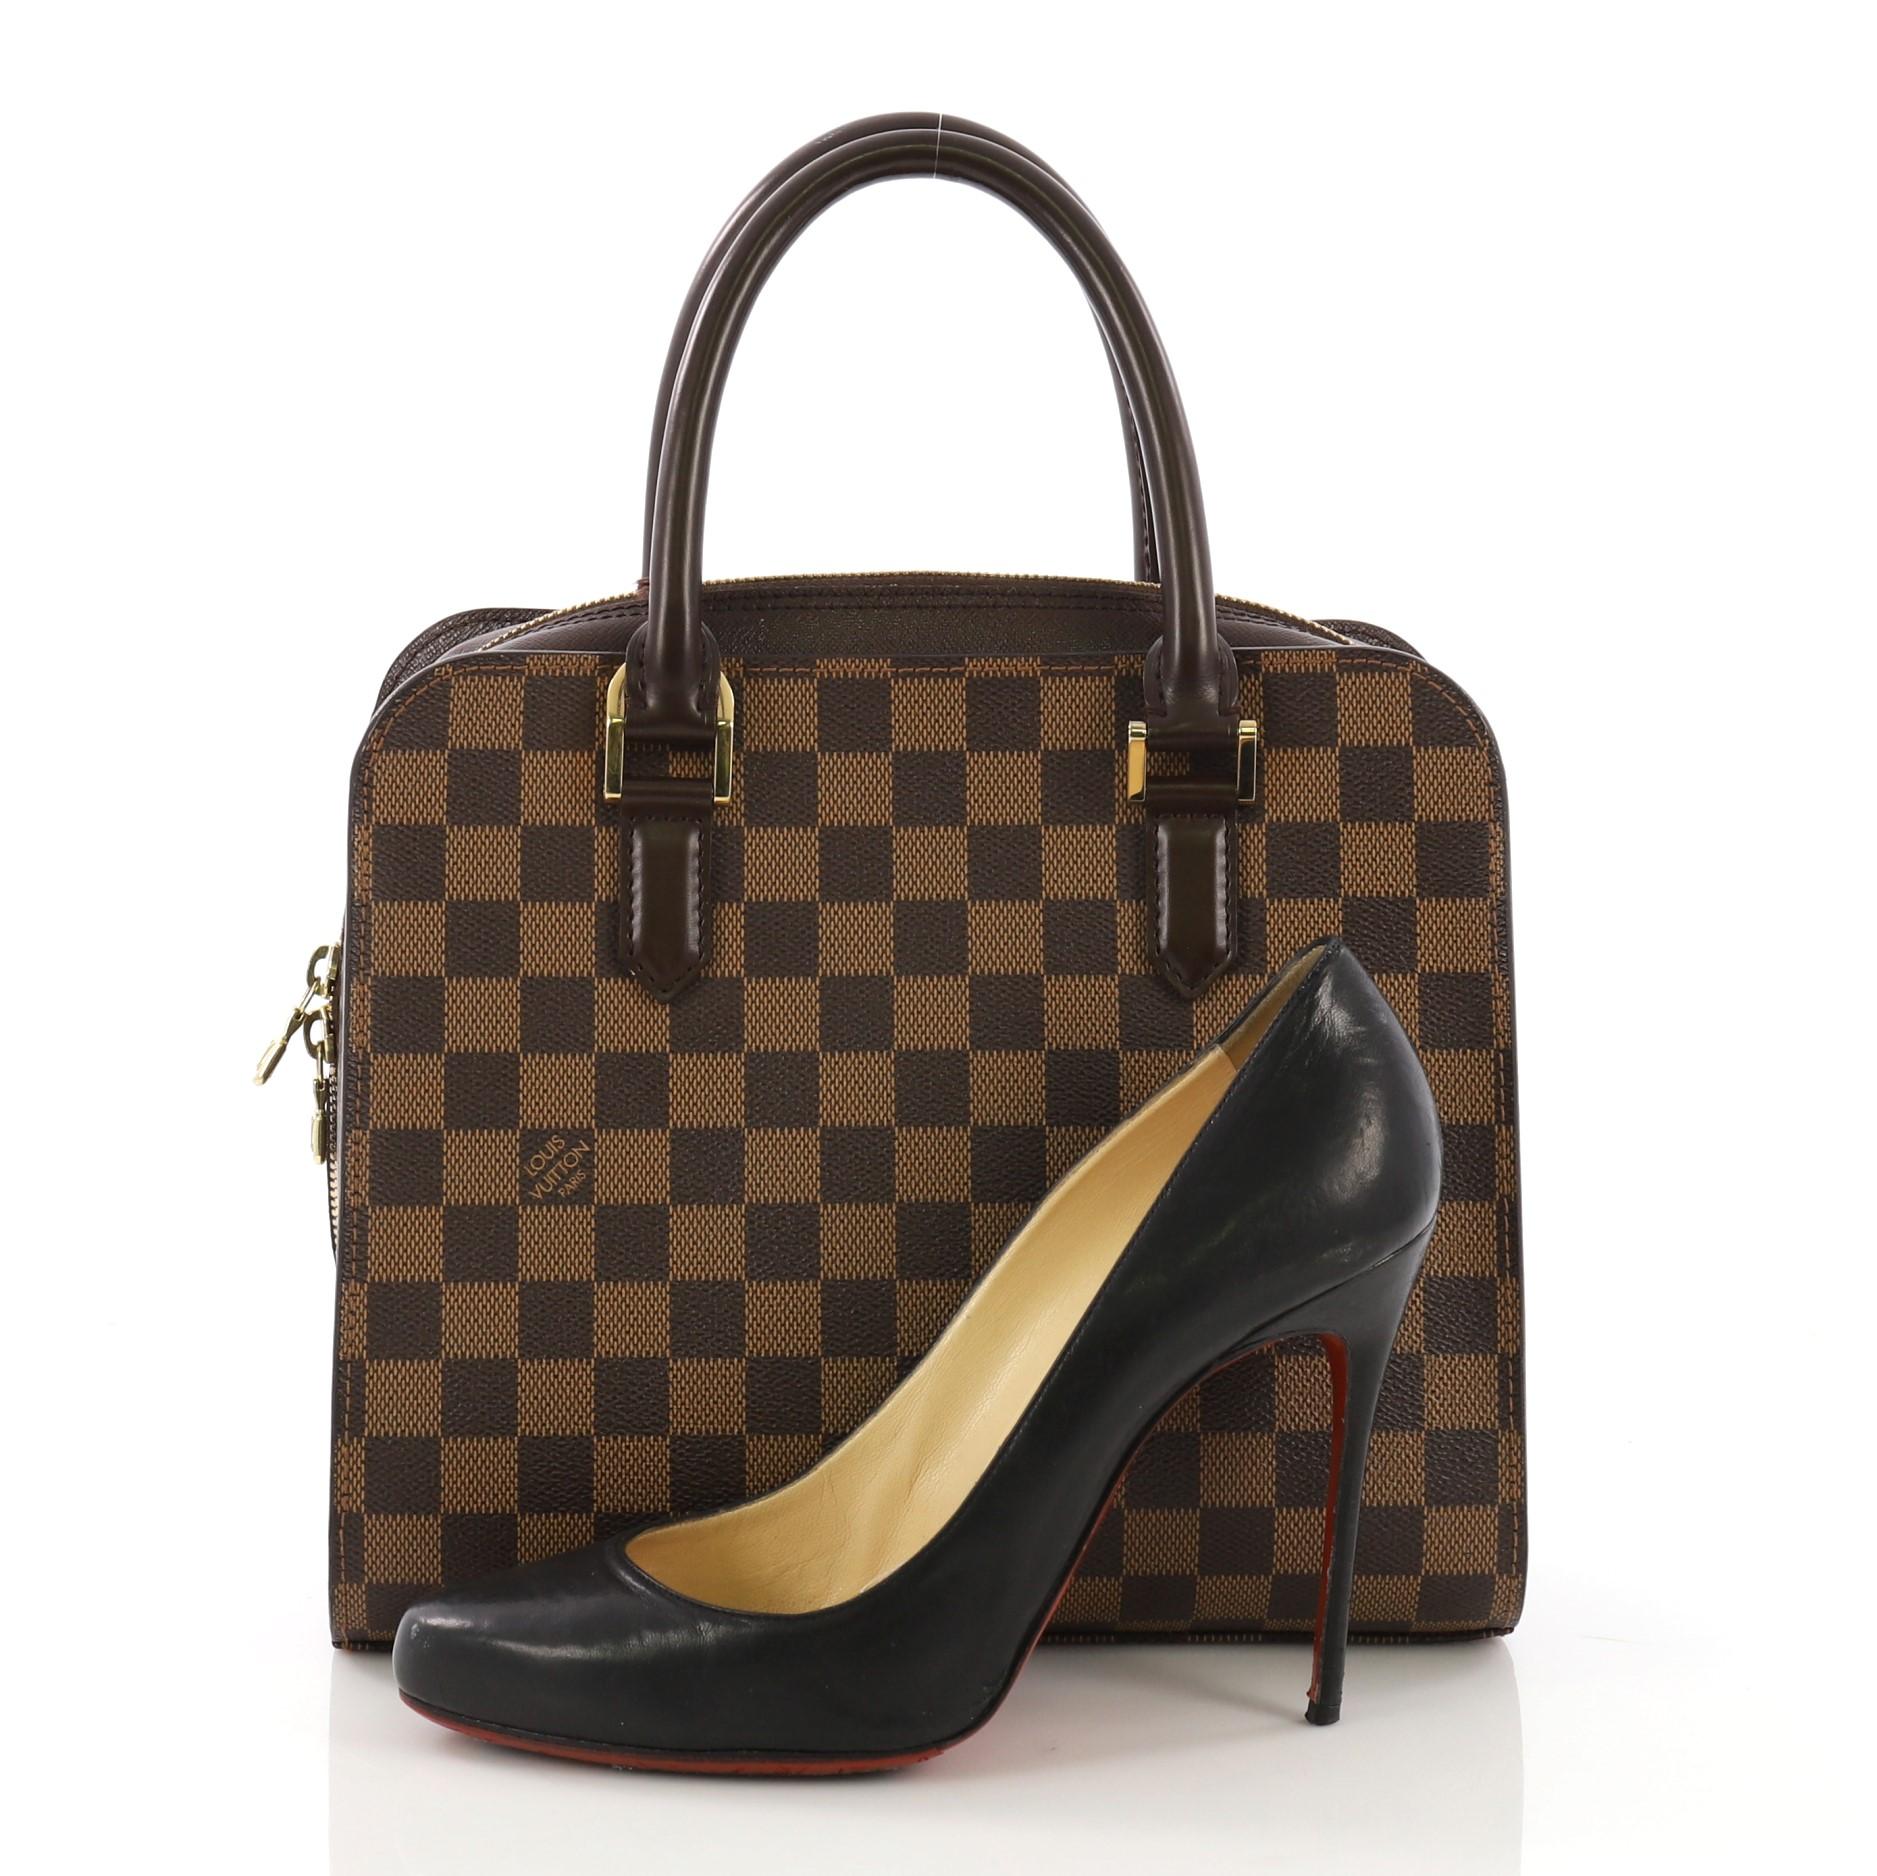 This Louis Vuitton Triana Bag Damier, crafted in damier ebene coated canvas, features dual rolled leather handles and gold-tone hardware. Its zip around closure opens to an orange microfiber interior with zip pocket. Authenticity code reads: VI0044.